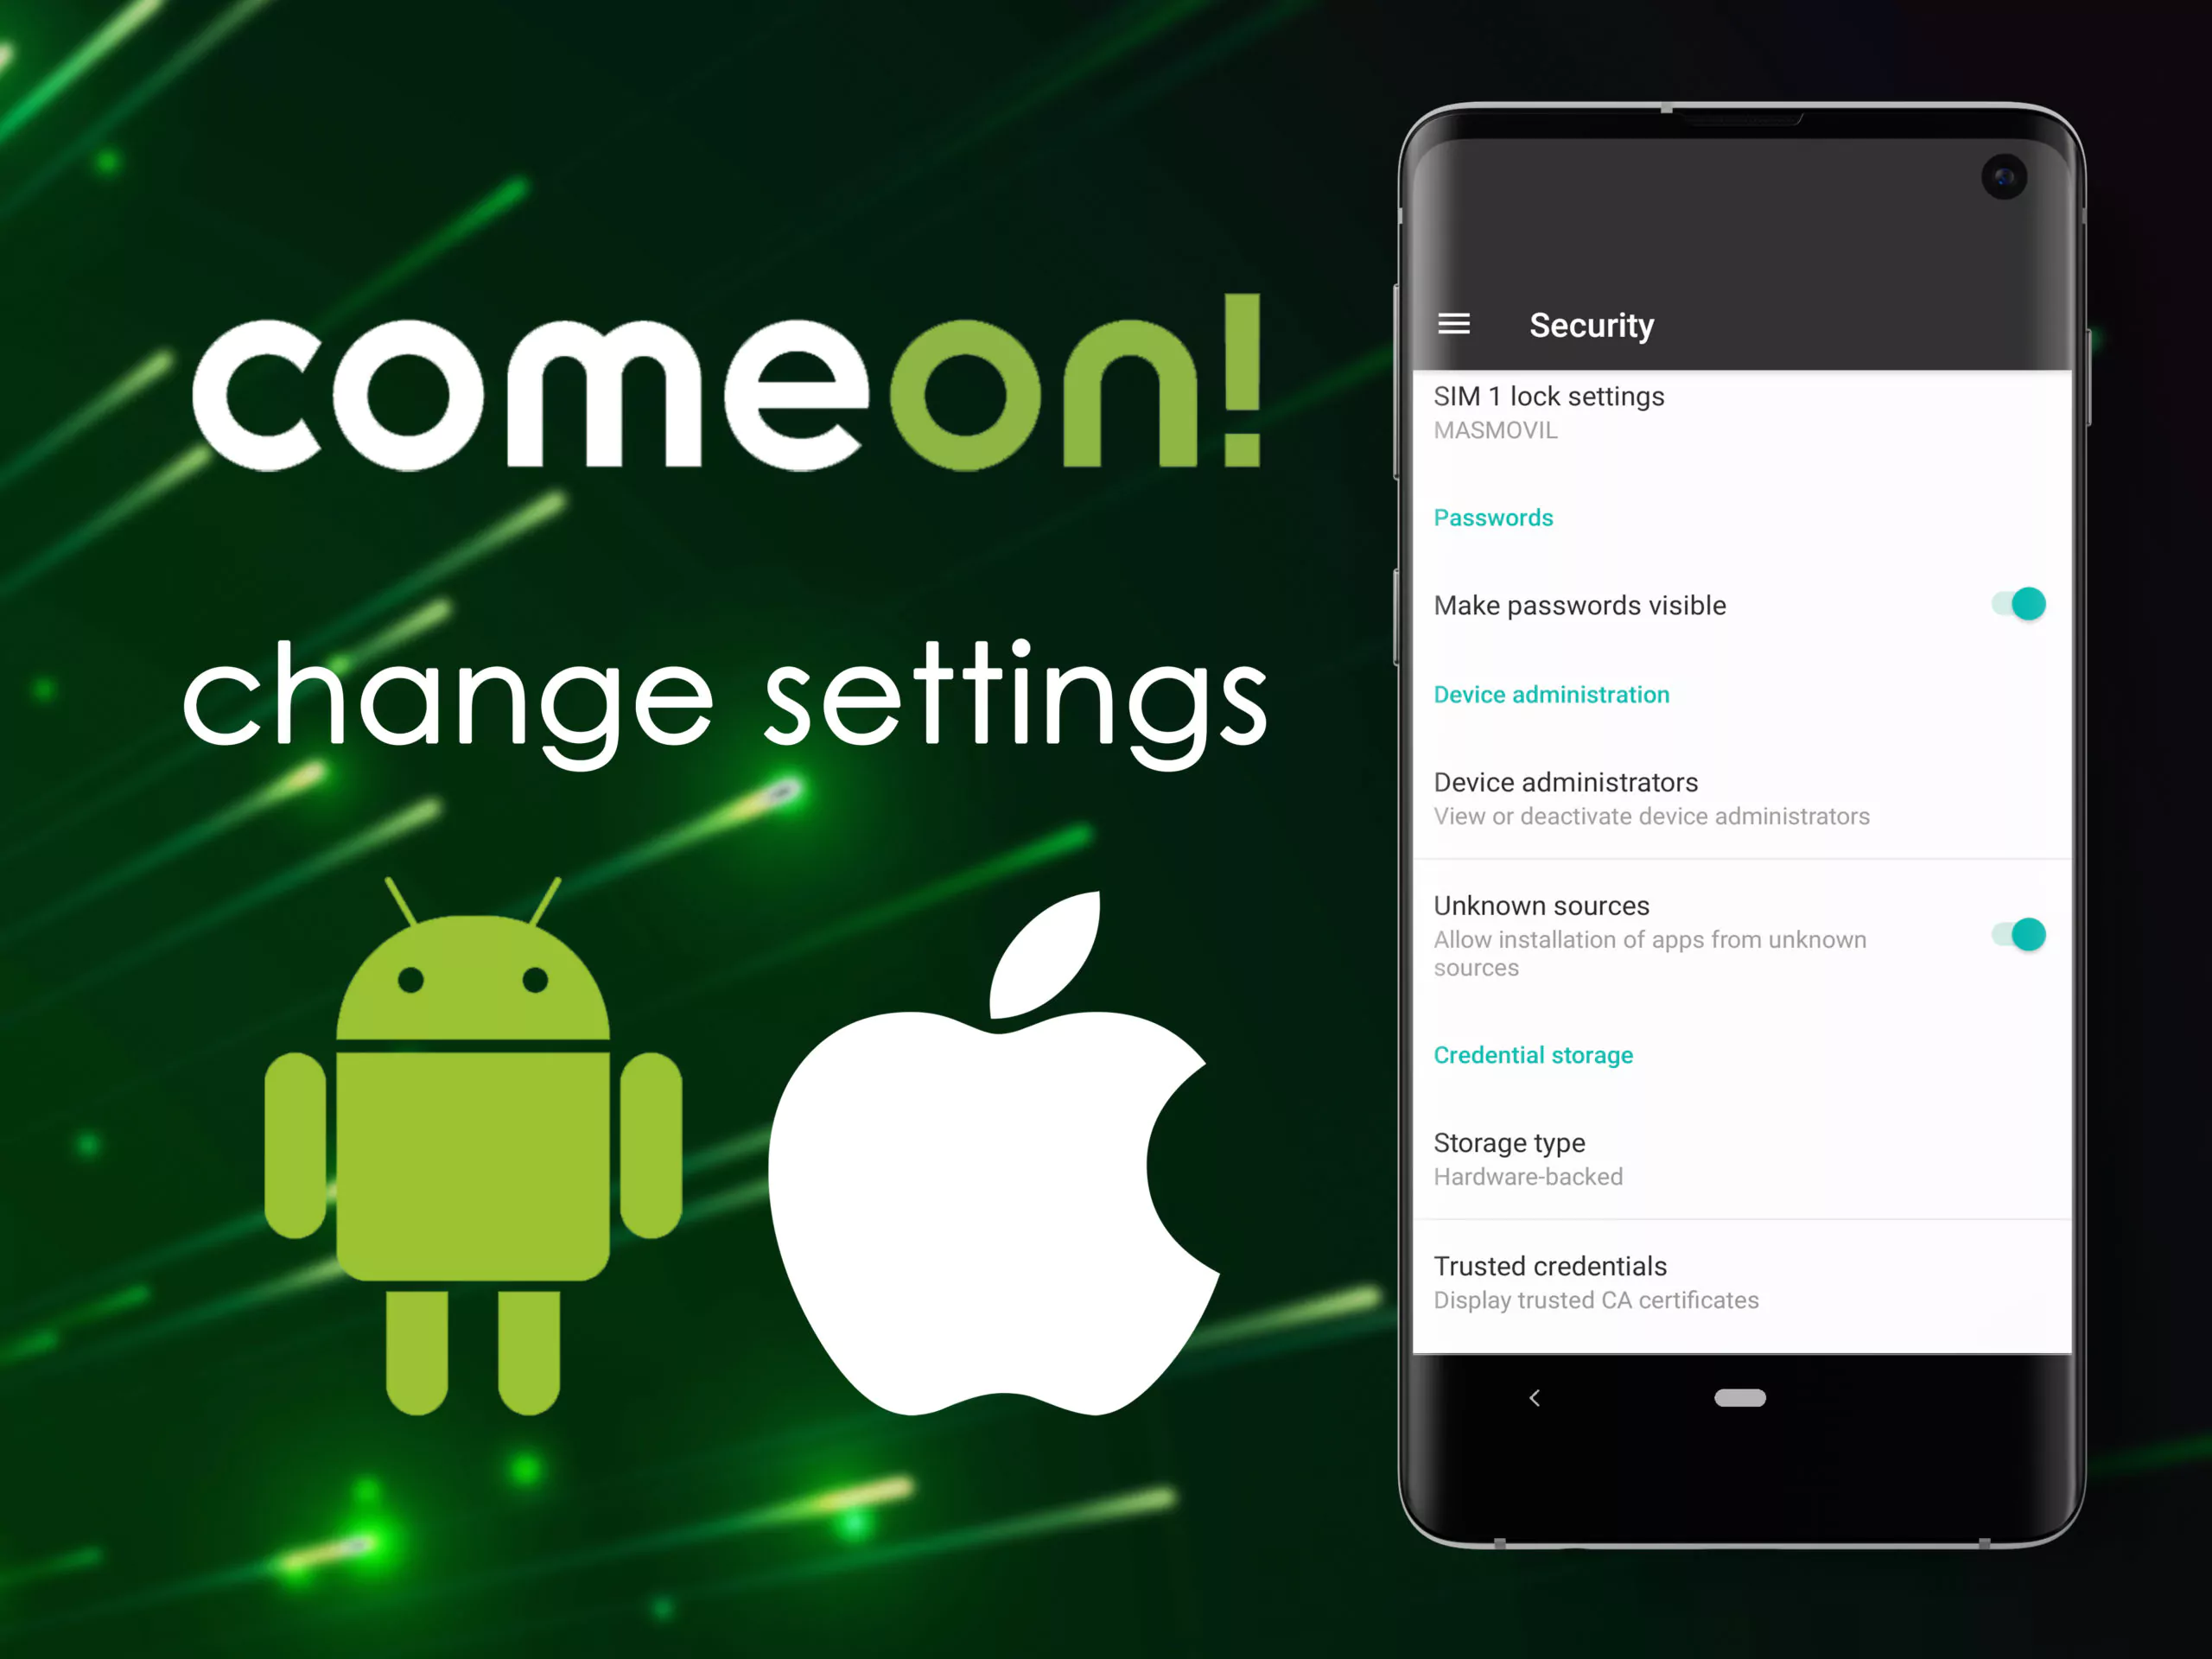 Change settings in the security section of your smartphone.